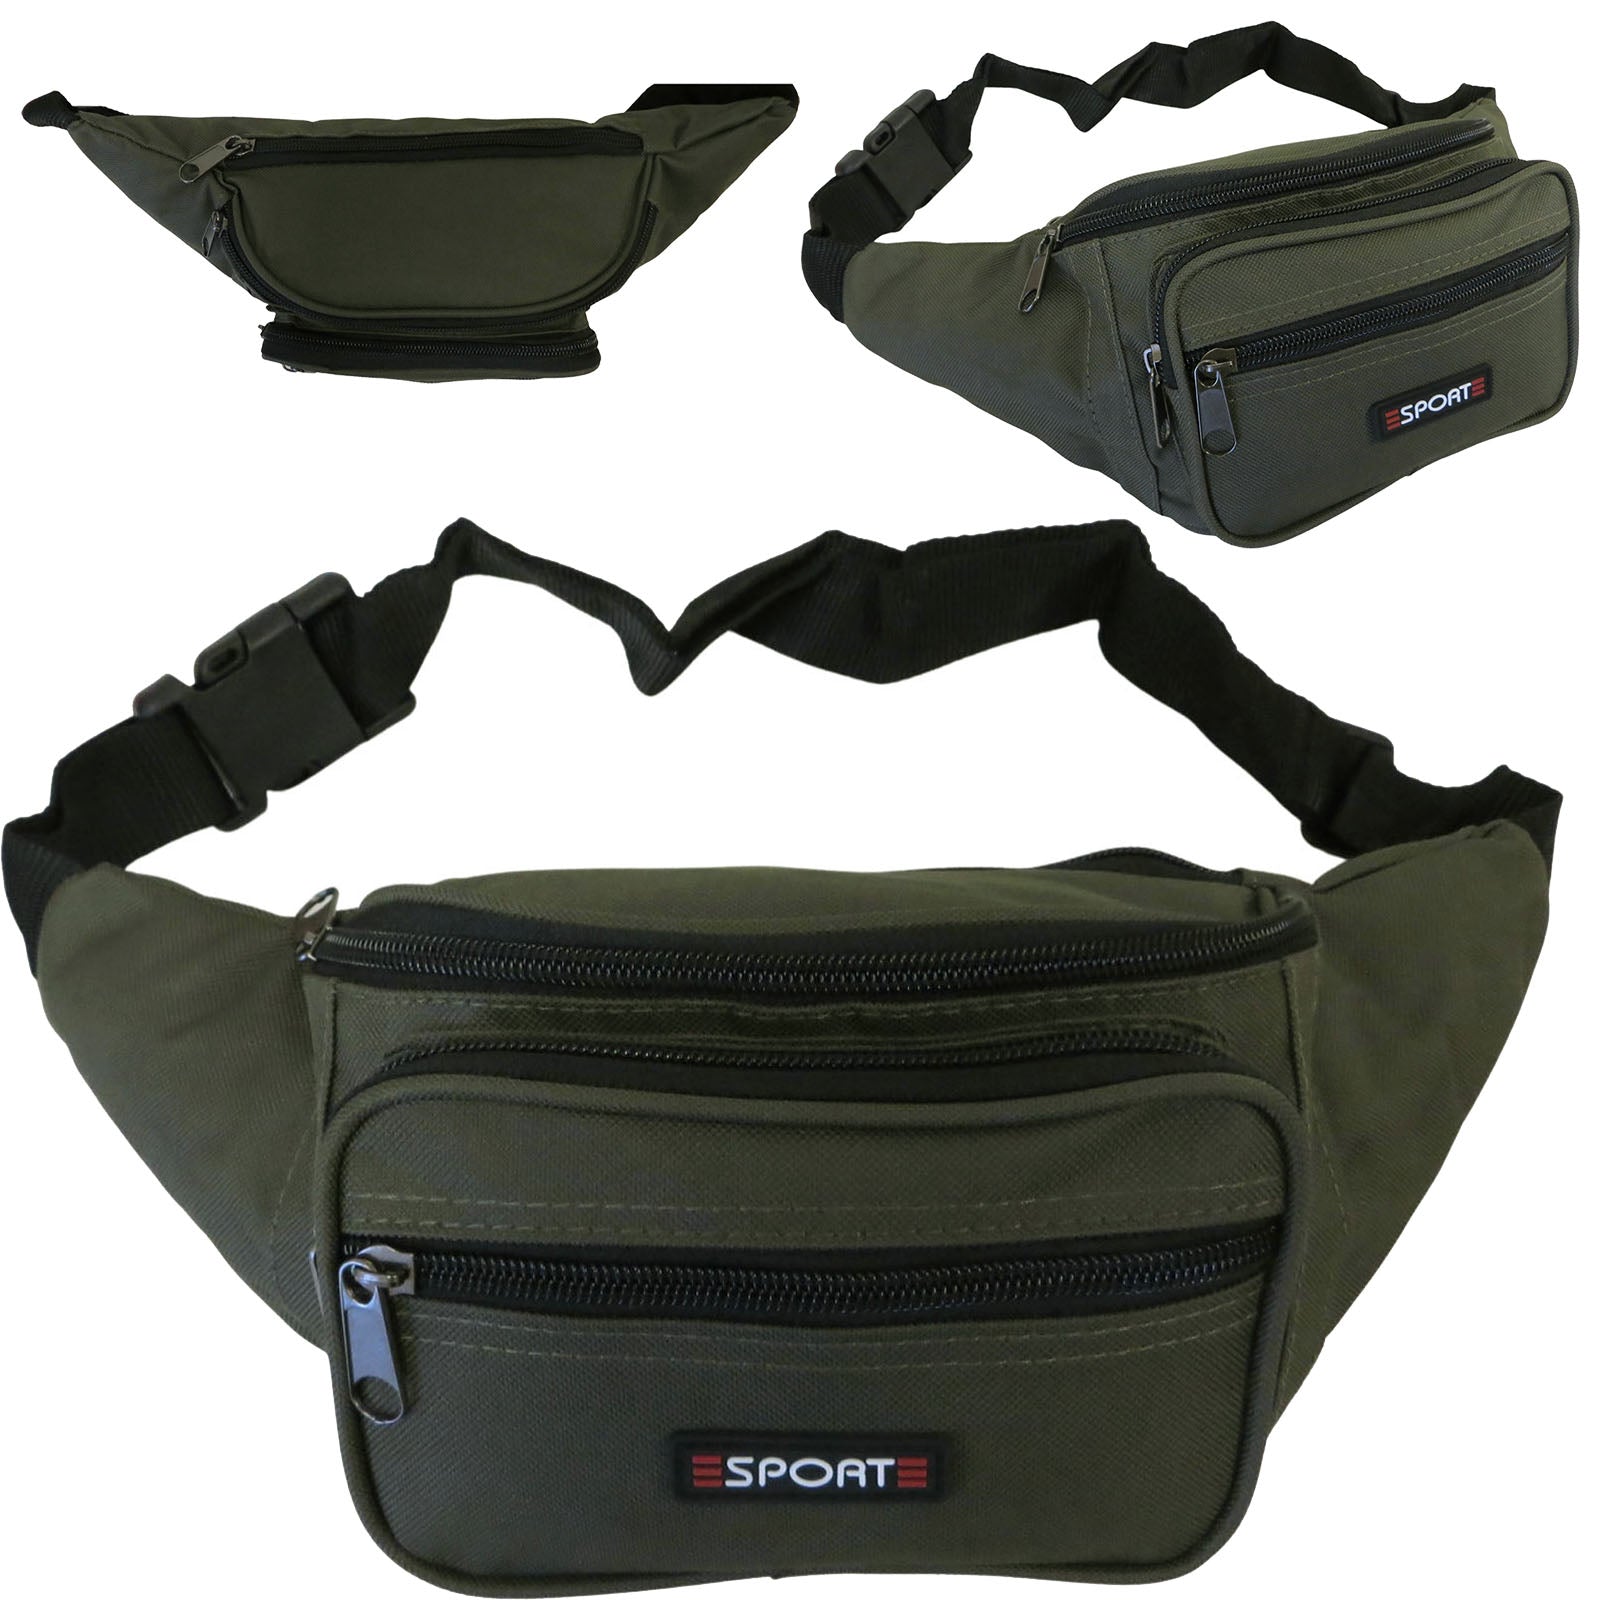 green wholesale fanny pack waist bag for men and women casual wear and travel